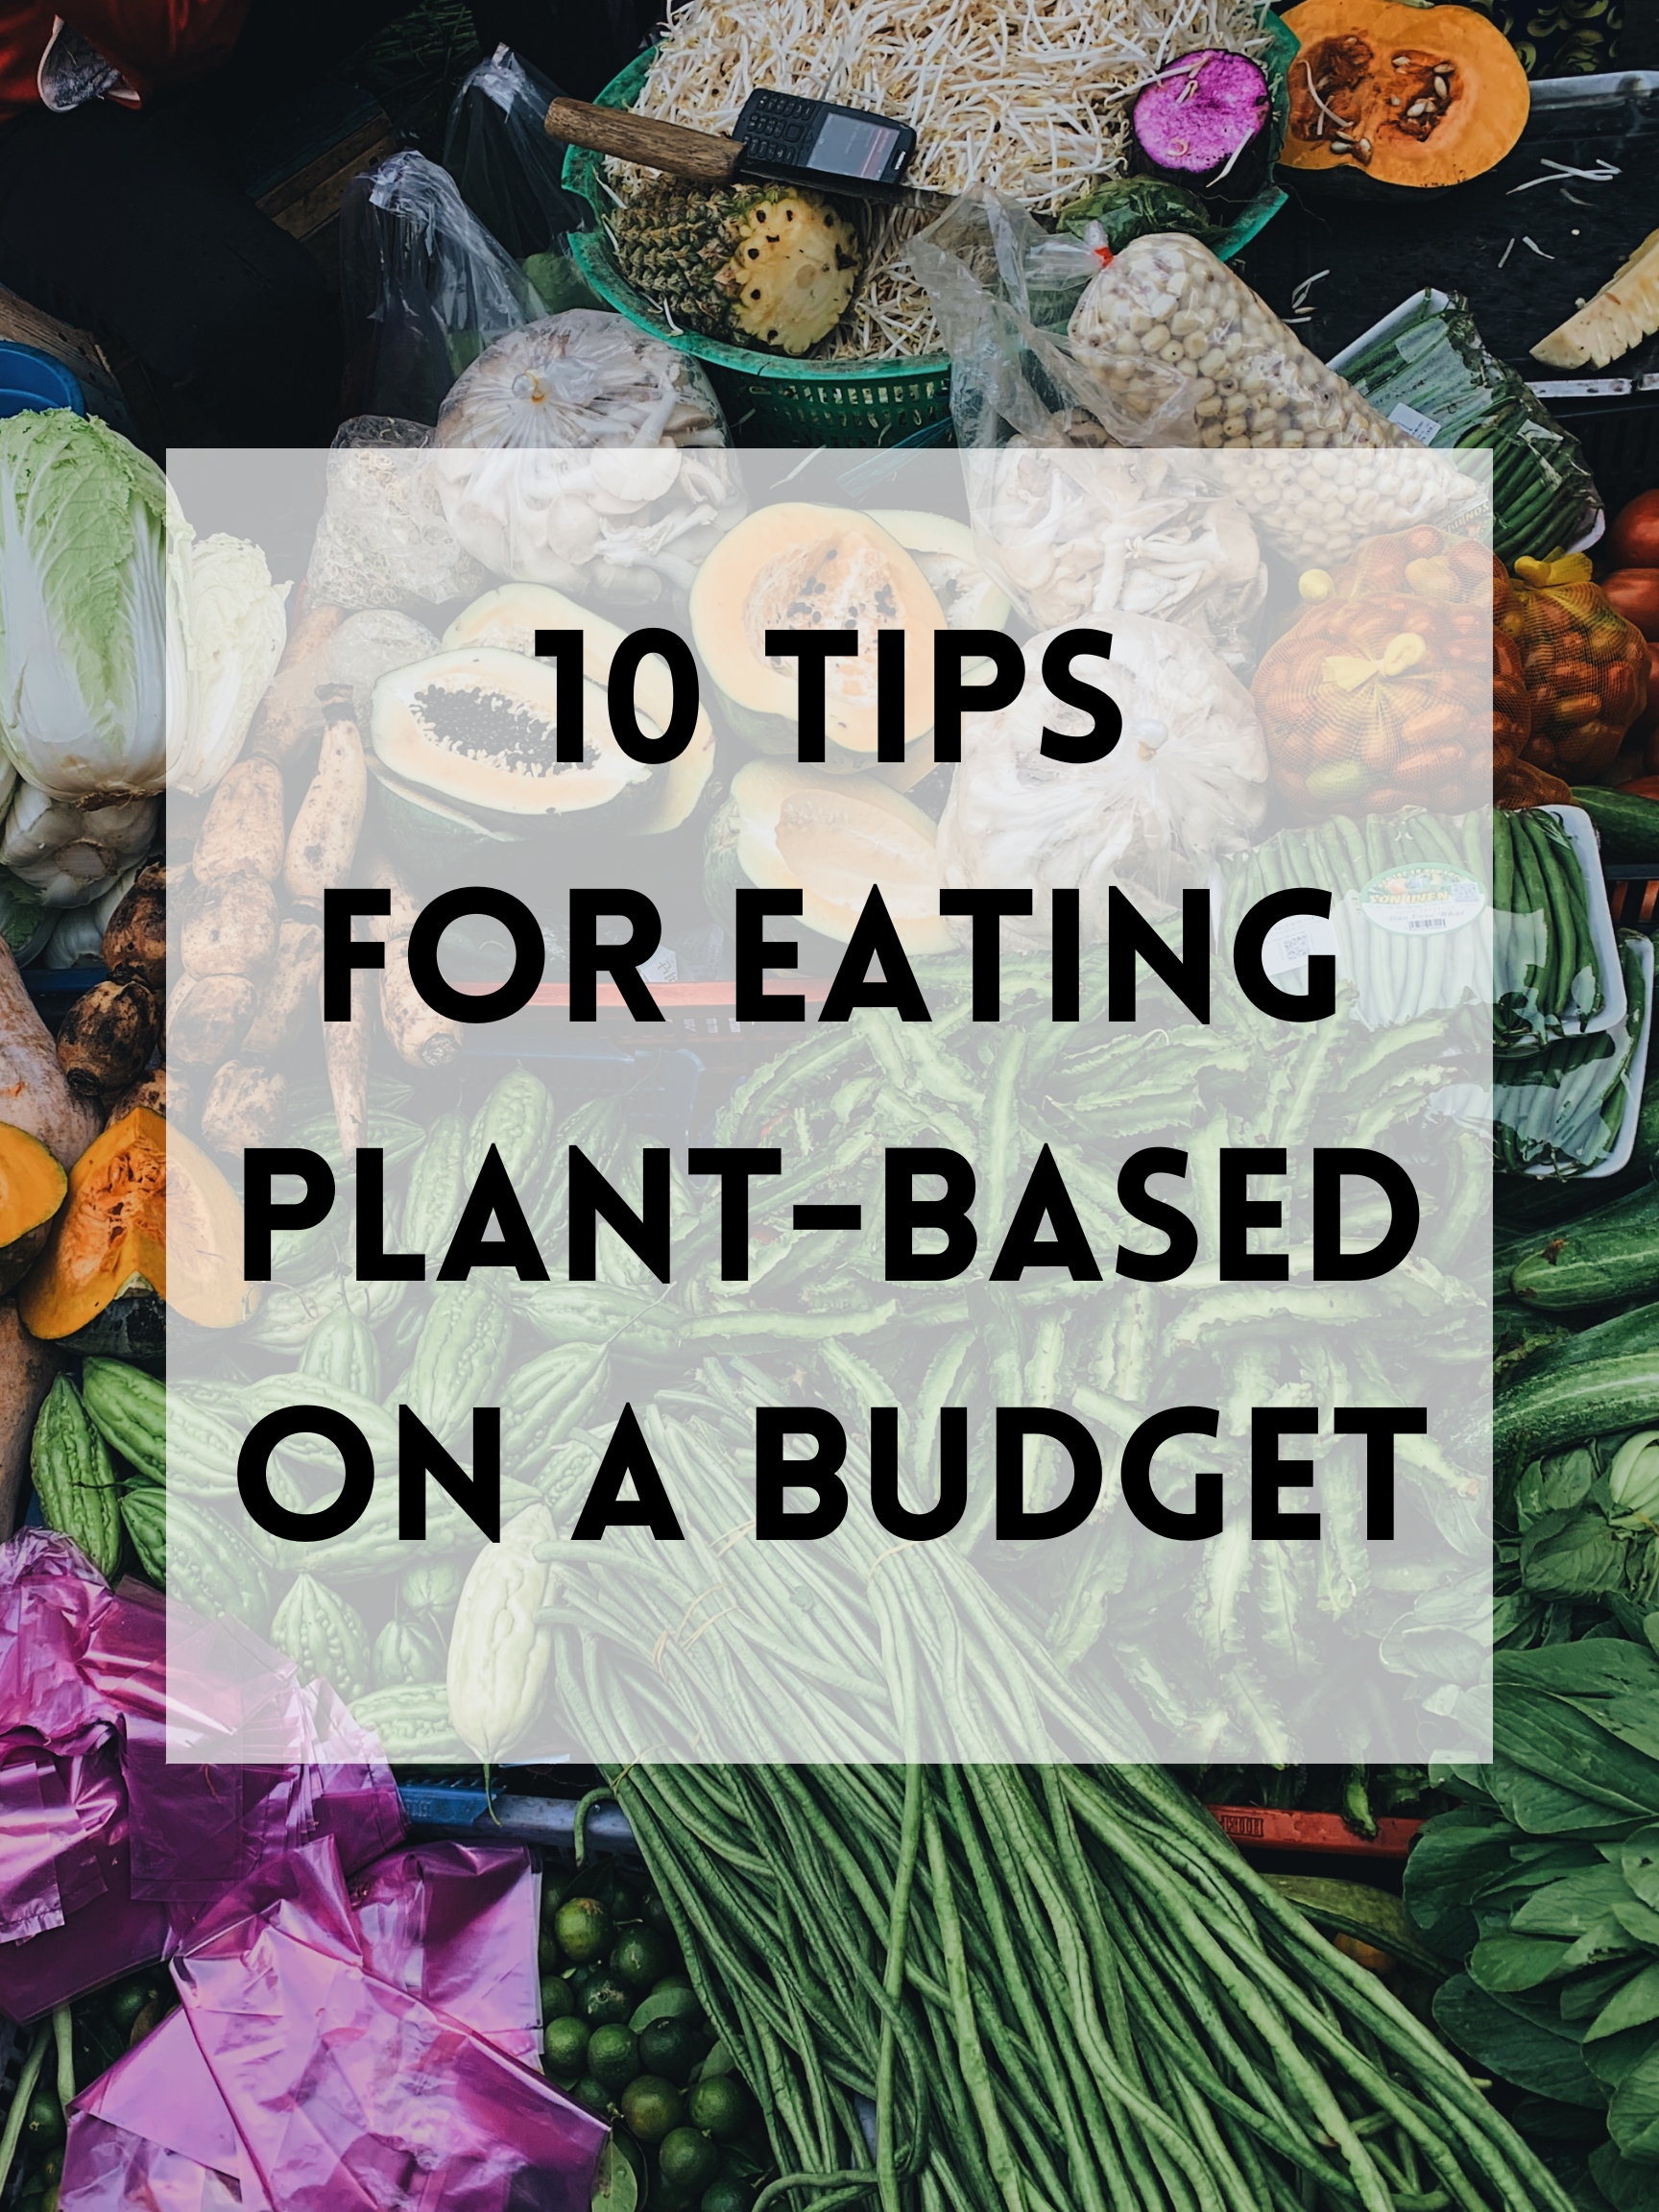 10 Tips for Eating Plant-Based on a Budget